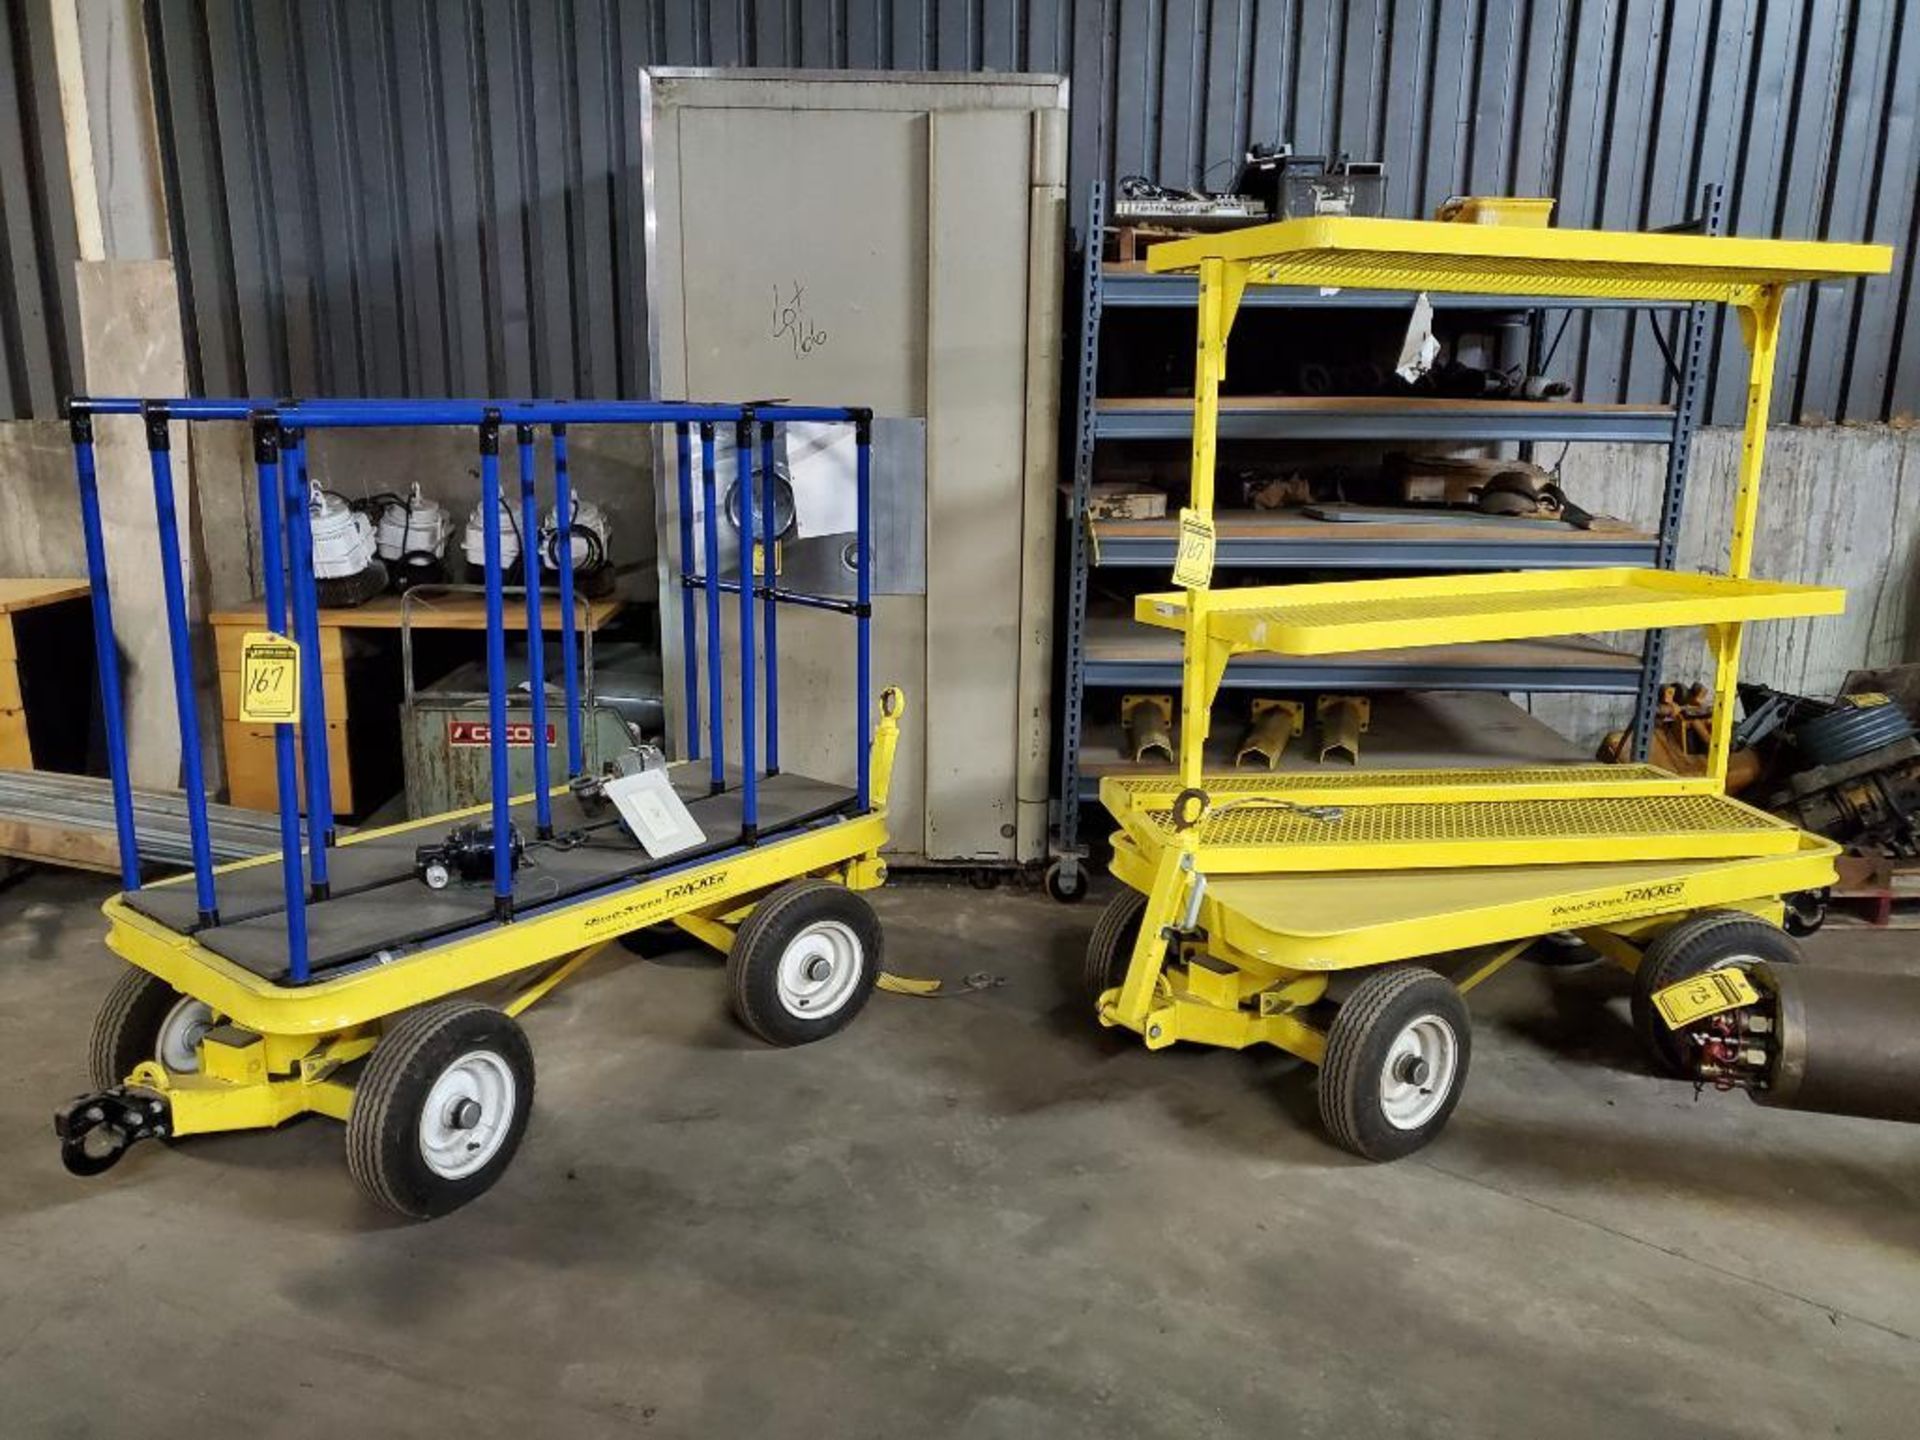 (2) Quad-Steer Tracker Towable Carts w/ Pneumatic Tires